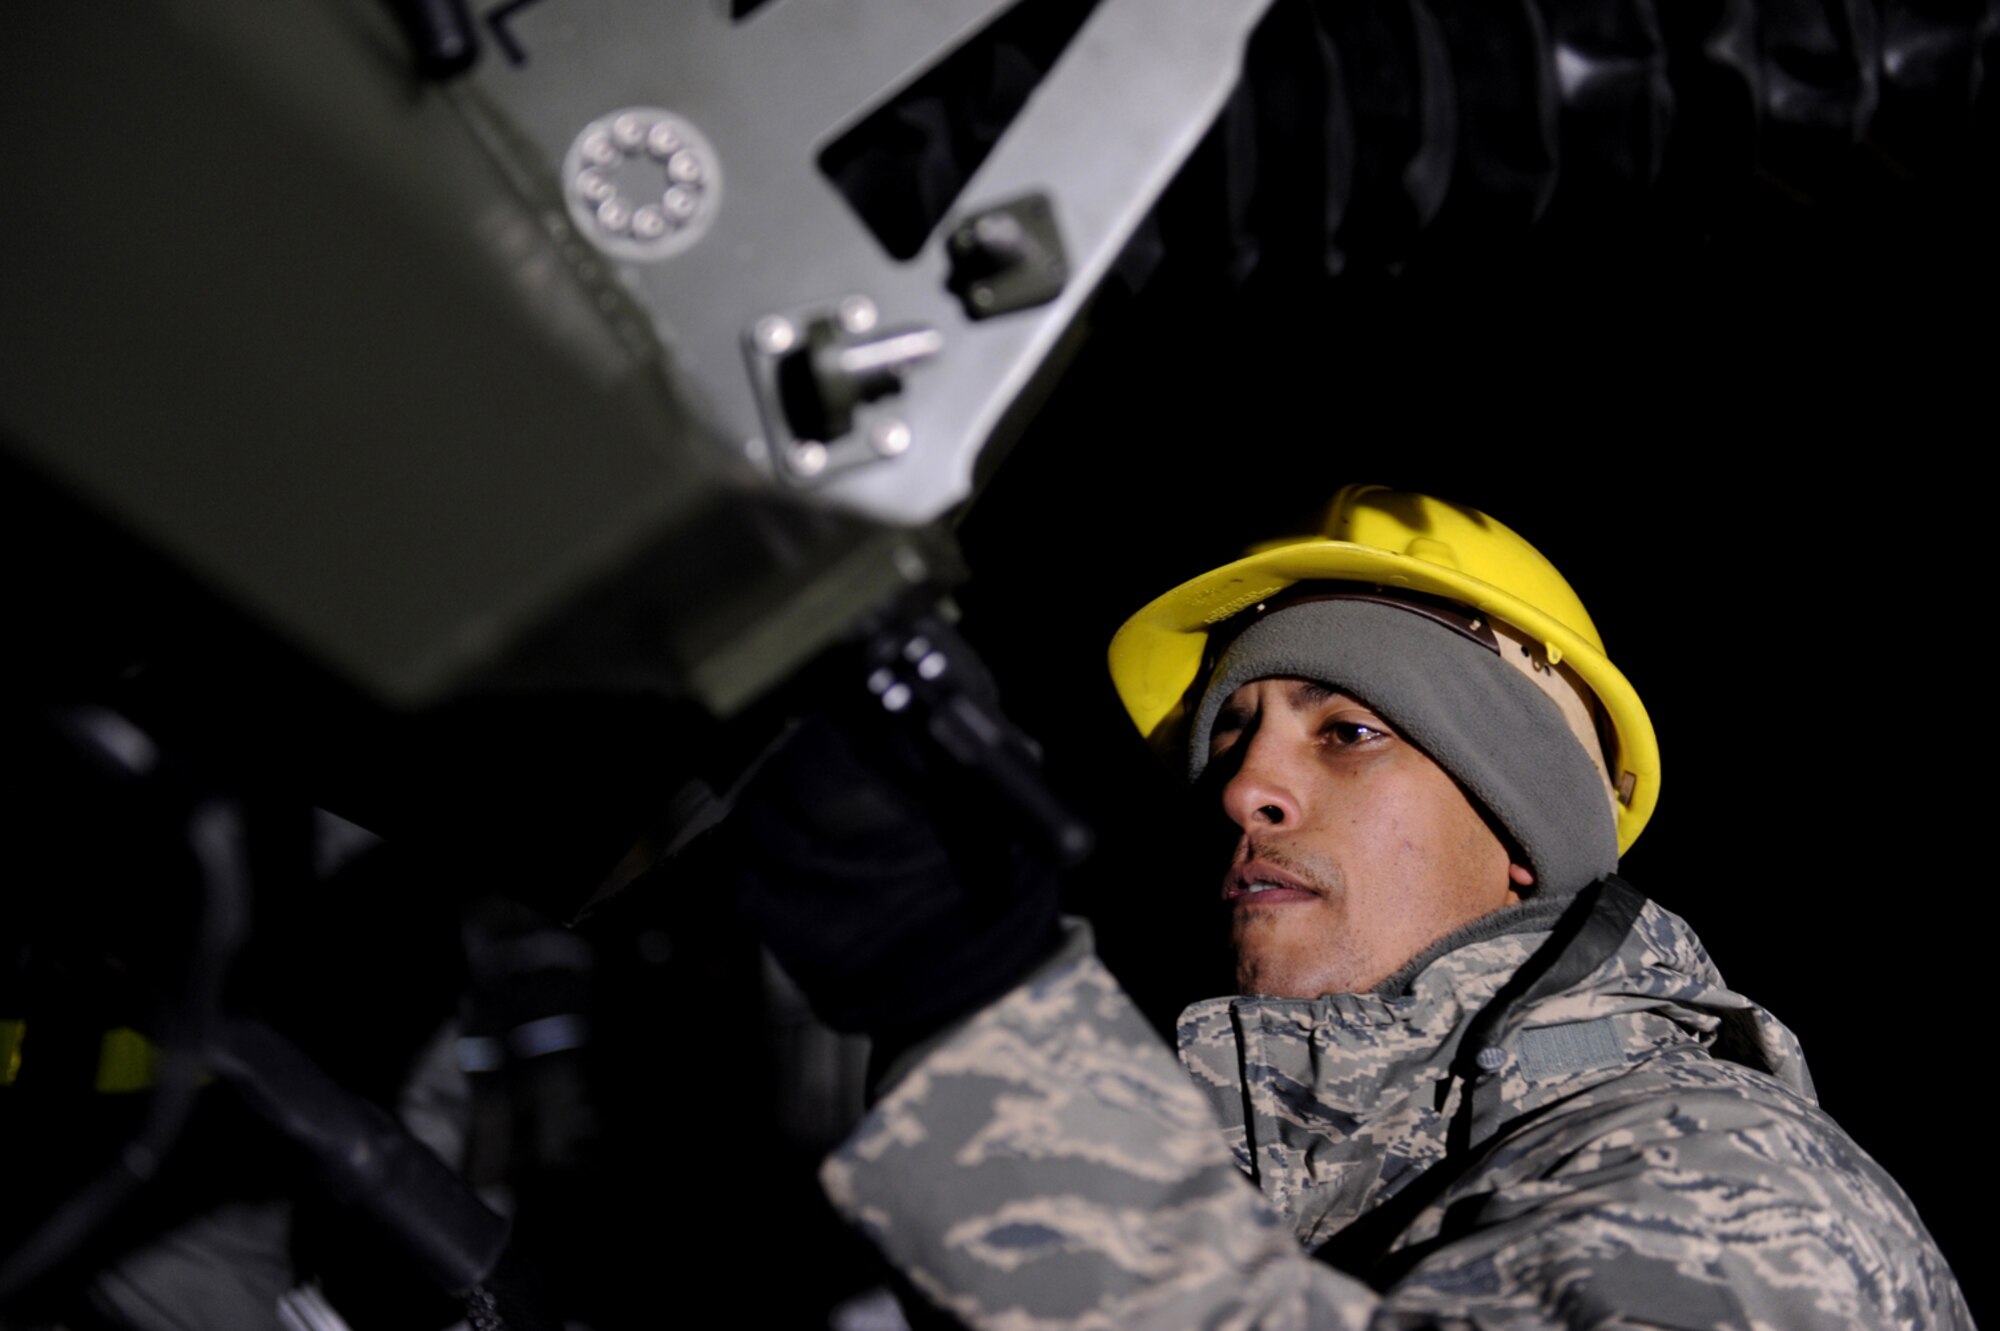 U.S. Air Force Tech. Sgt. Uriah Doss, 1st Combat Communications Squadron, Ramstein Air Base, Germany, sets up a communications satellite at Flugplatz Bitburg, Germany, Jan. 27, 2010, in preparation of Ramstein's operational readiness inspection in September. The units are setting up bare-base operations as part of the dual-wing operational readiness exercise with the 86th Airlift Wing. This is the second of five operational readiness exercises. (U.S. Air Force photo by Staff Sgt. Sarayuth Pinthong)